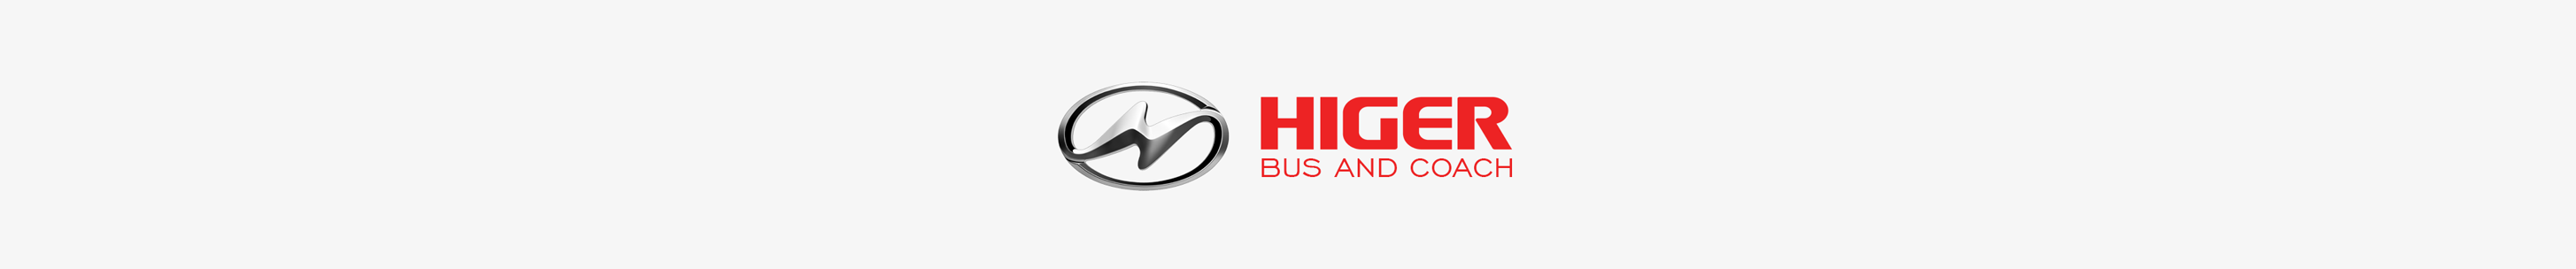 Higer - Bus and Coach.